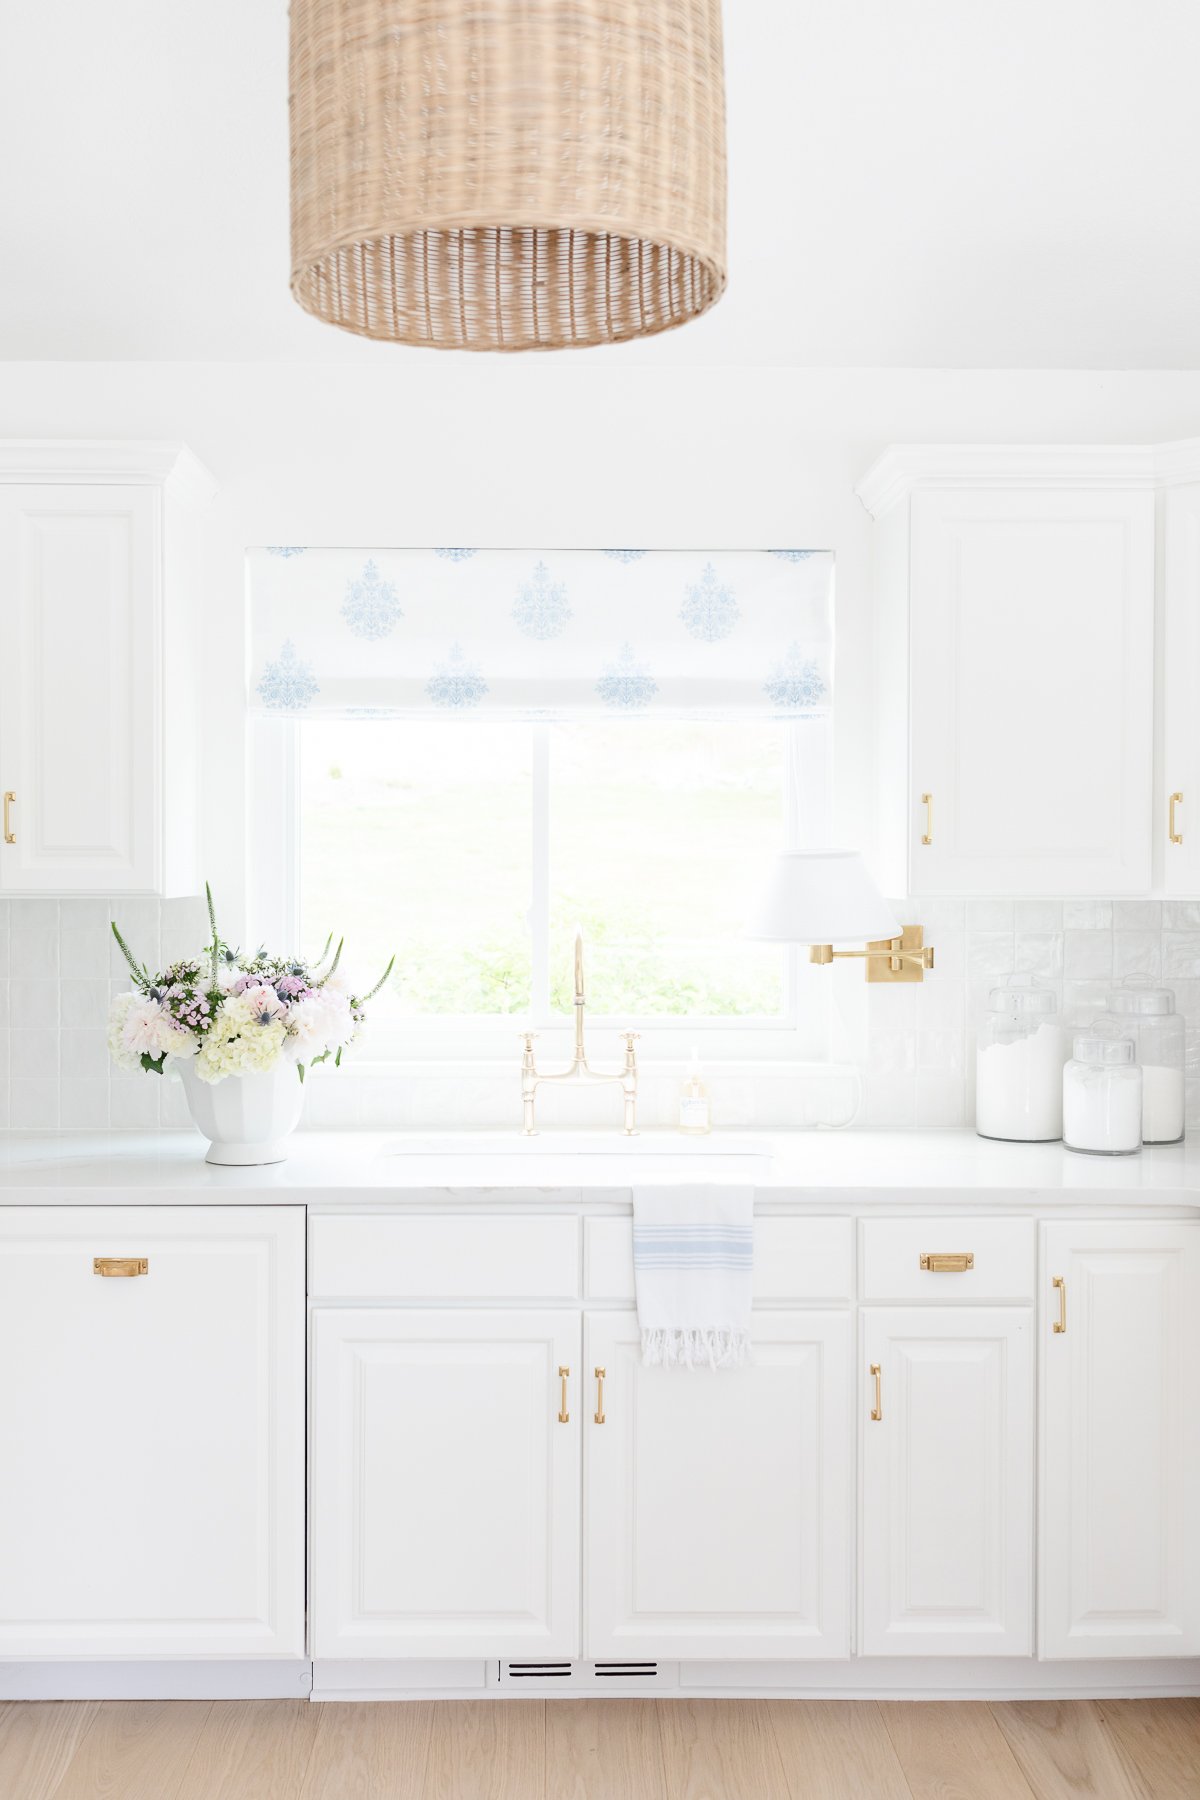 A kitchen with white cabinets and a wicker pendant light. The kitchen counter organization is perfect.